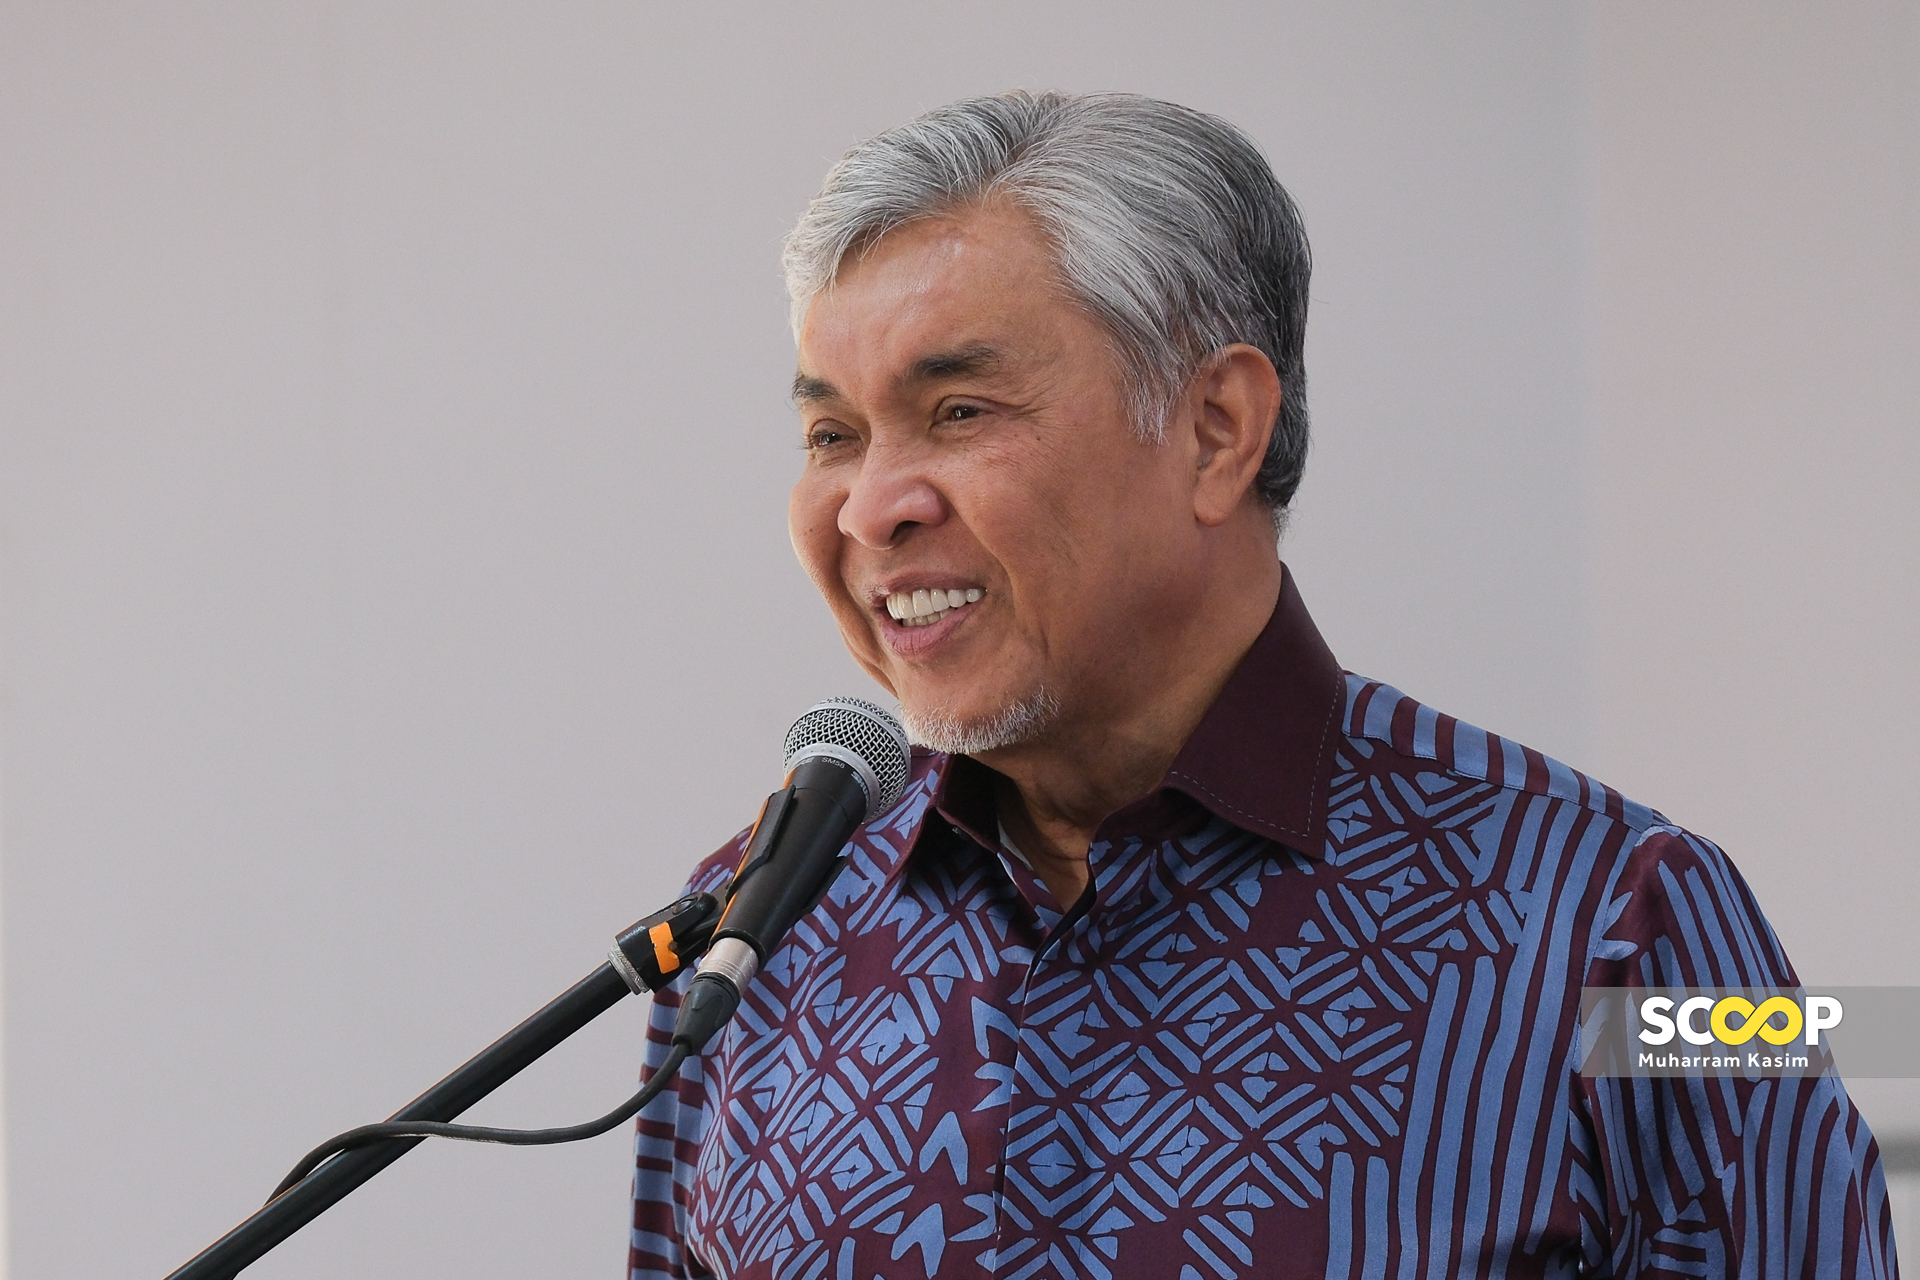 Battle begins: Zahid announces Umno's play in Nenggiri by-election